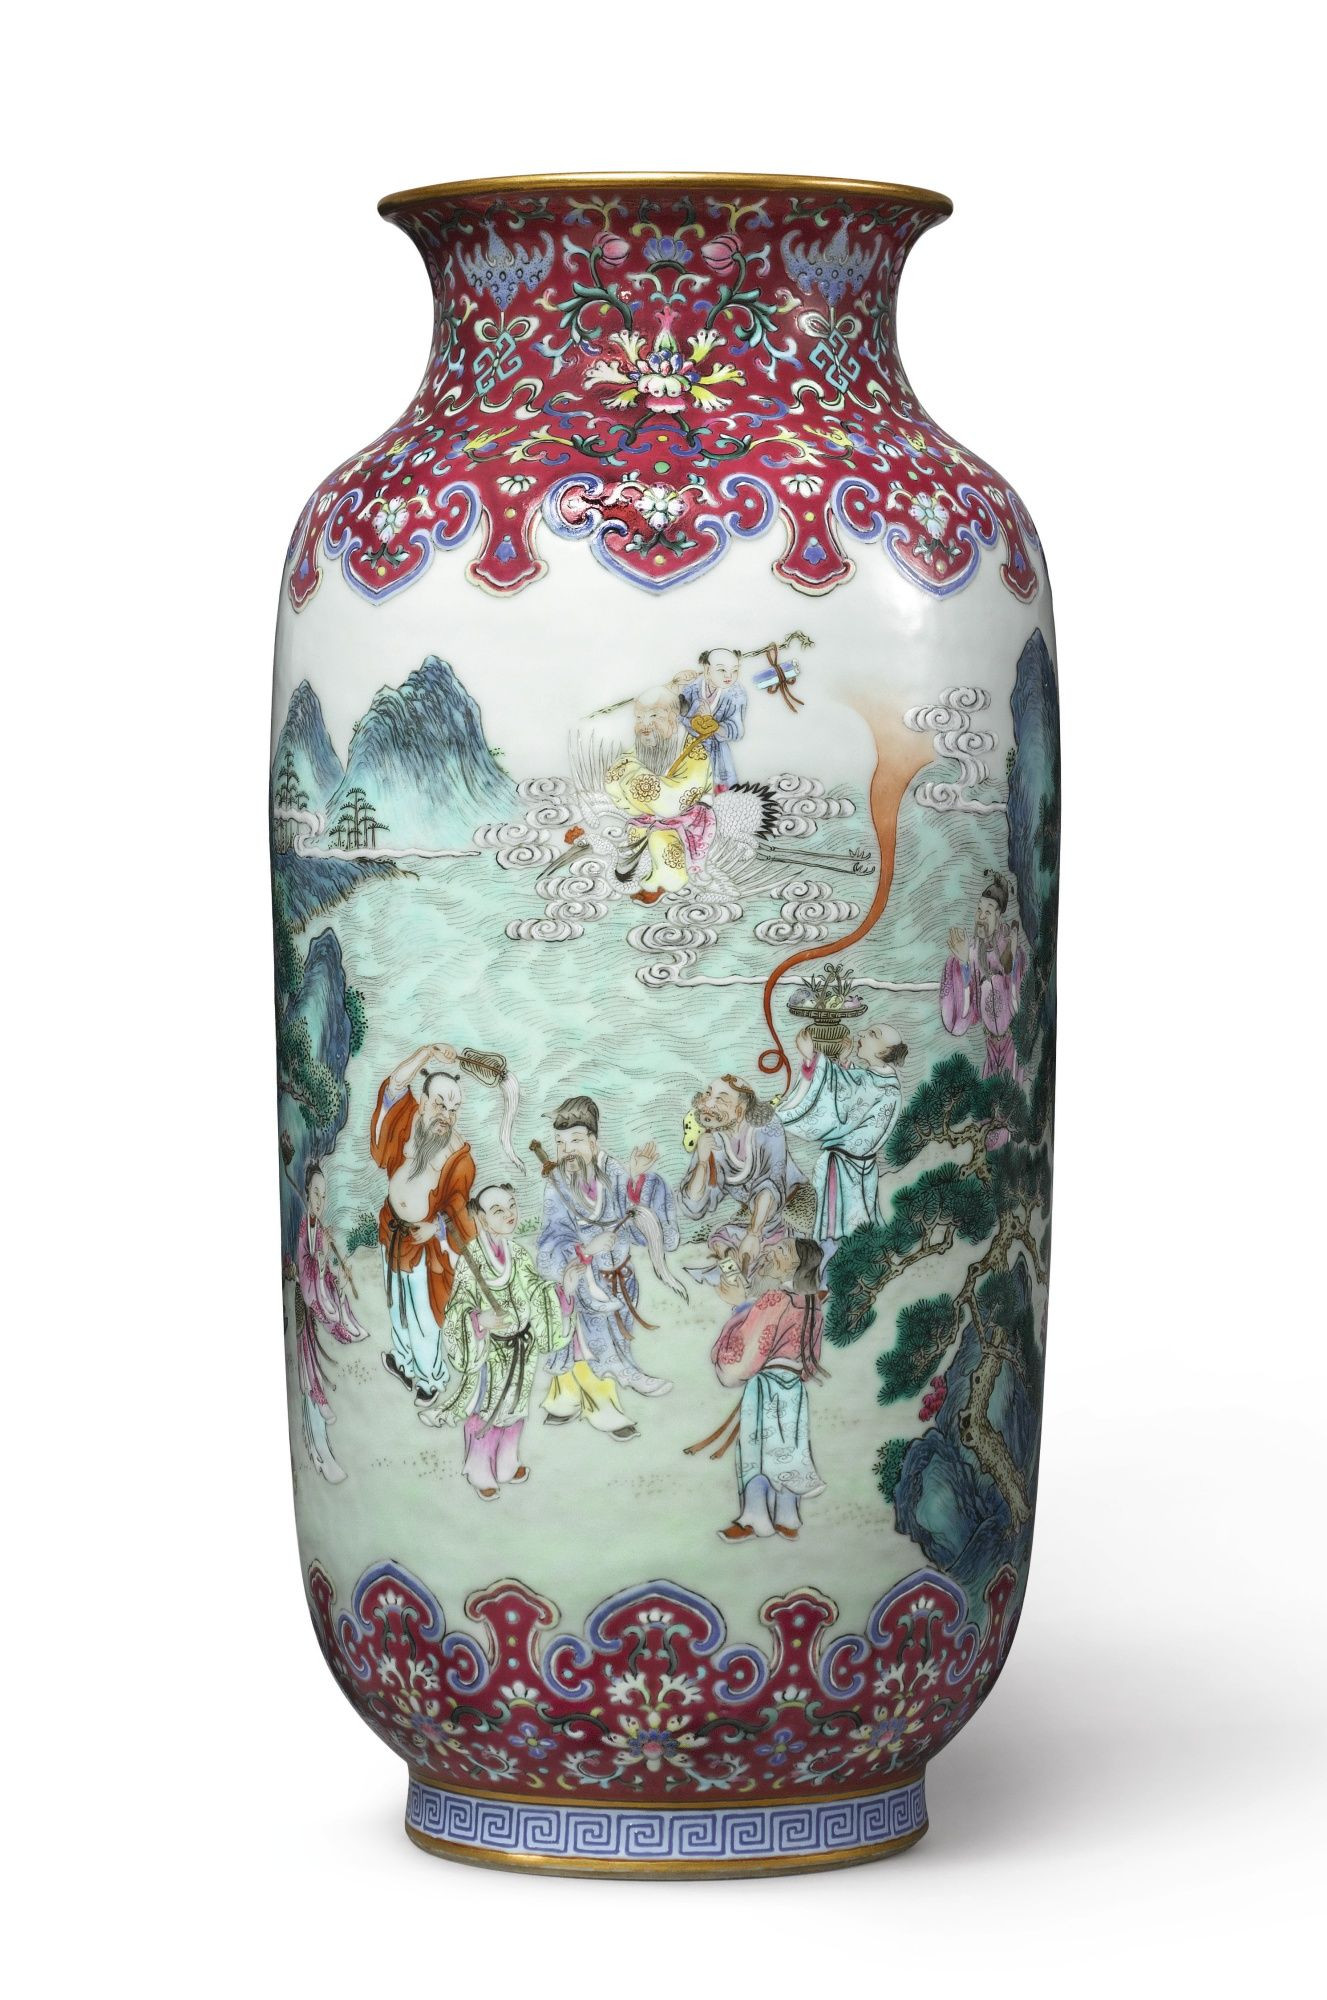 30 Wonderful Chinese Vases for Sale Uk 2024 free download chinese vases for sale uk of large ruby ground famille rose eight daoist immortals vase with large ruby ground famille rose eight daoist immortals vase qianlong mark and period exceptional f